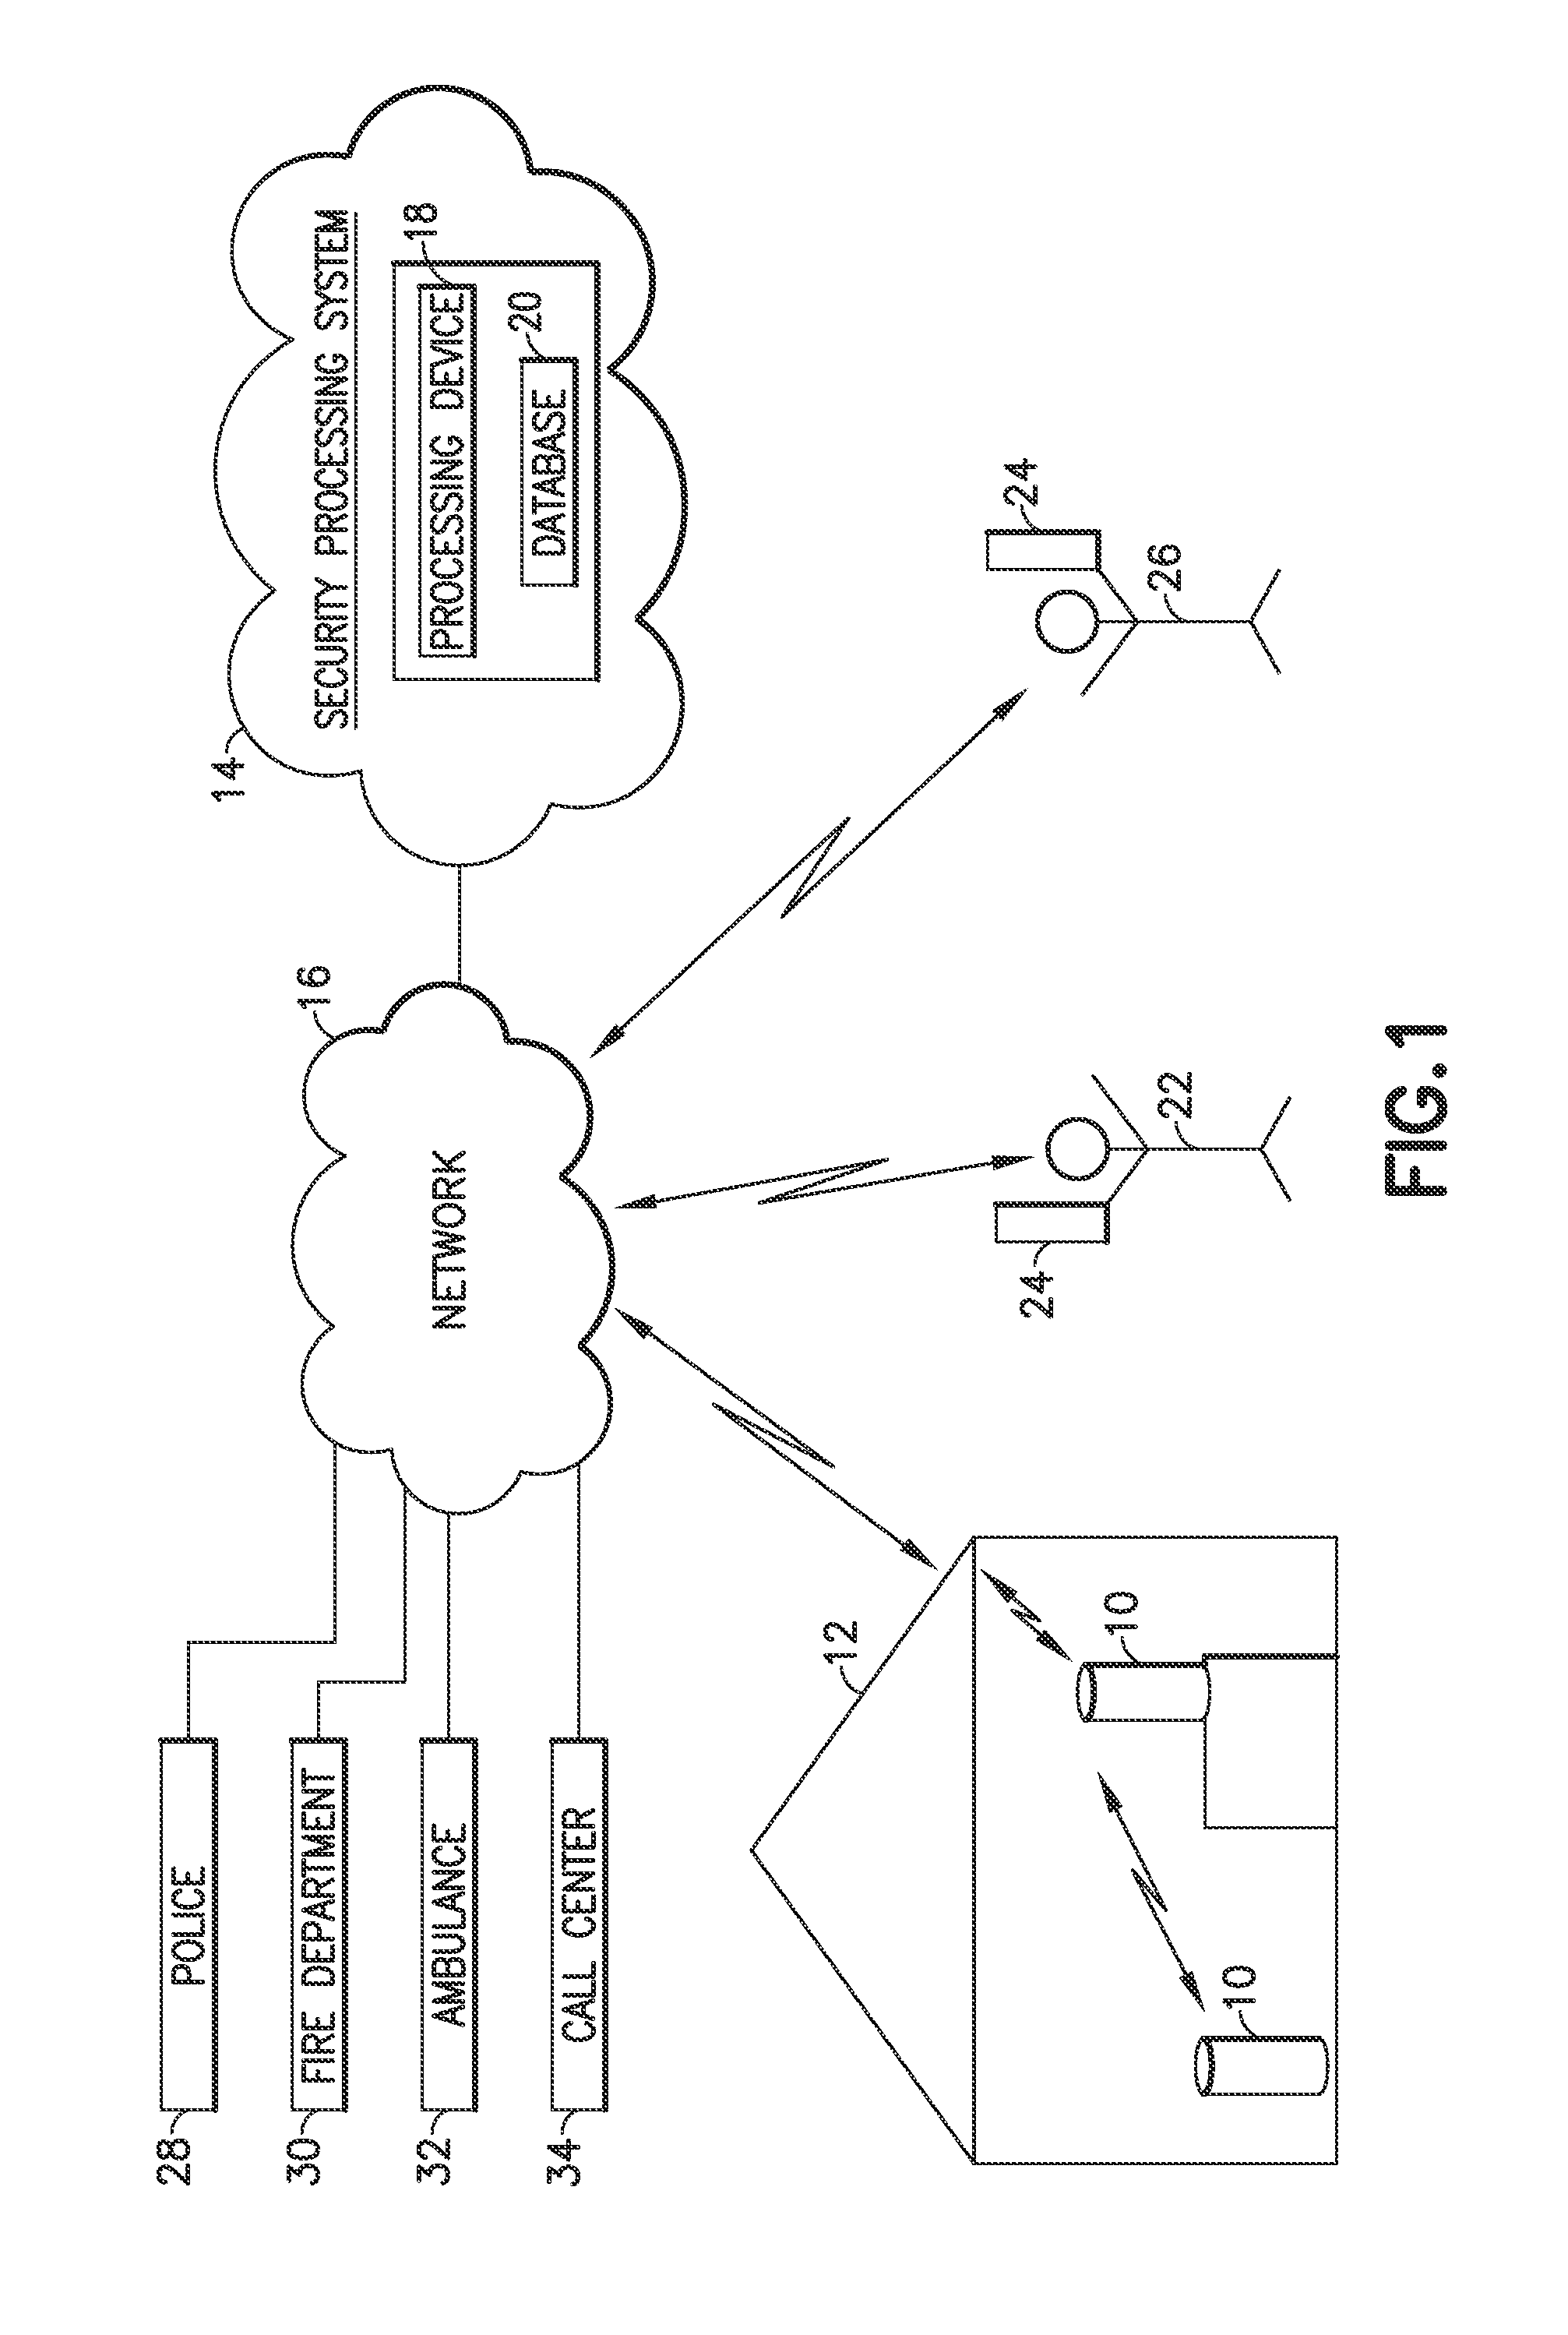 System and methods for designating and notifying secondary users for location-based monitoring